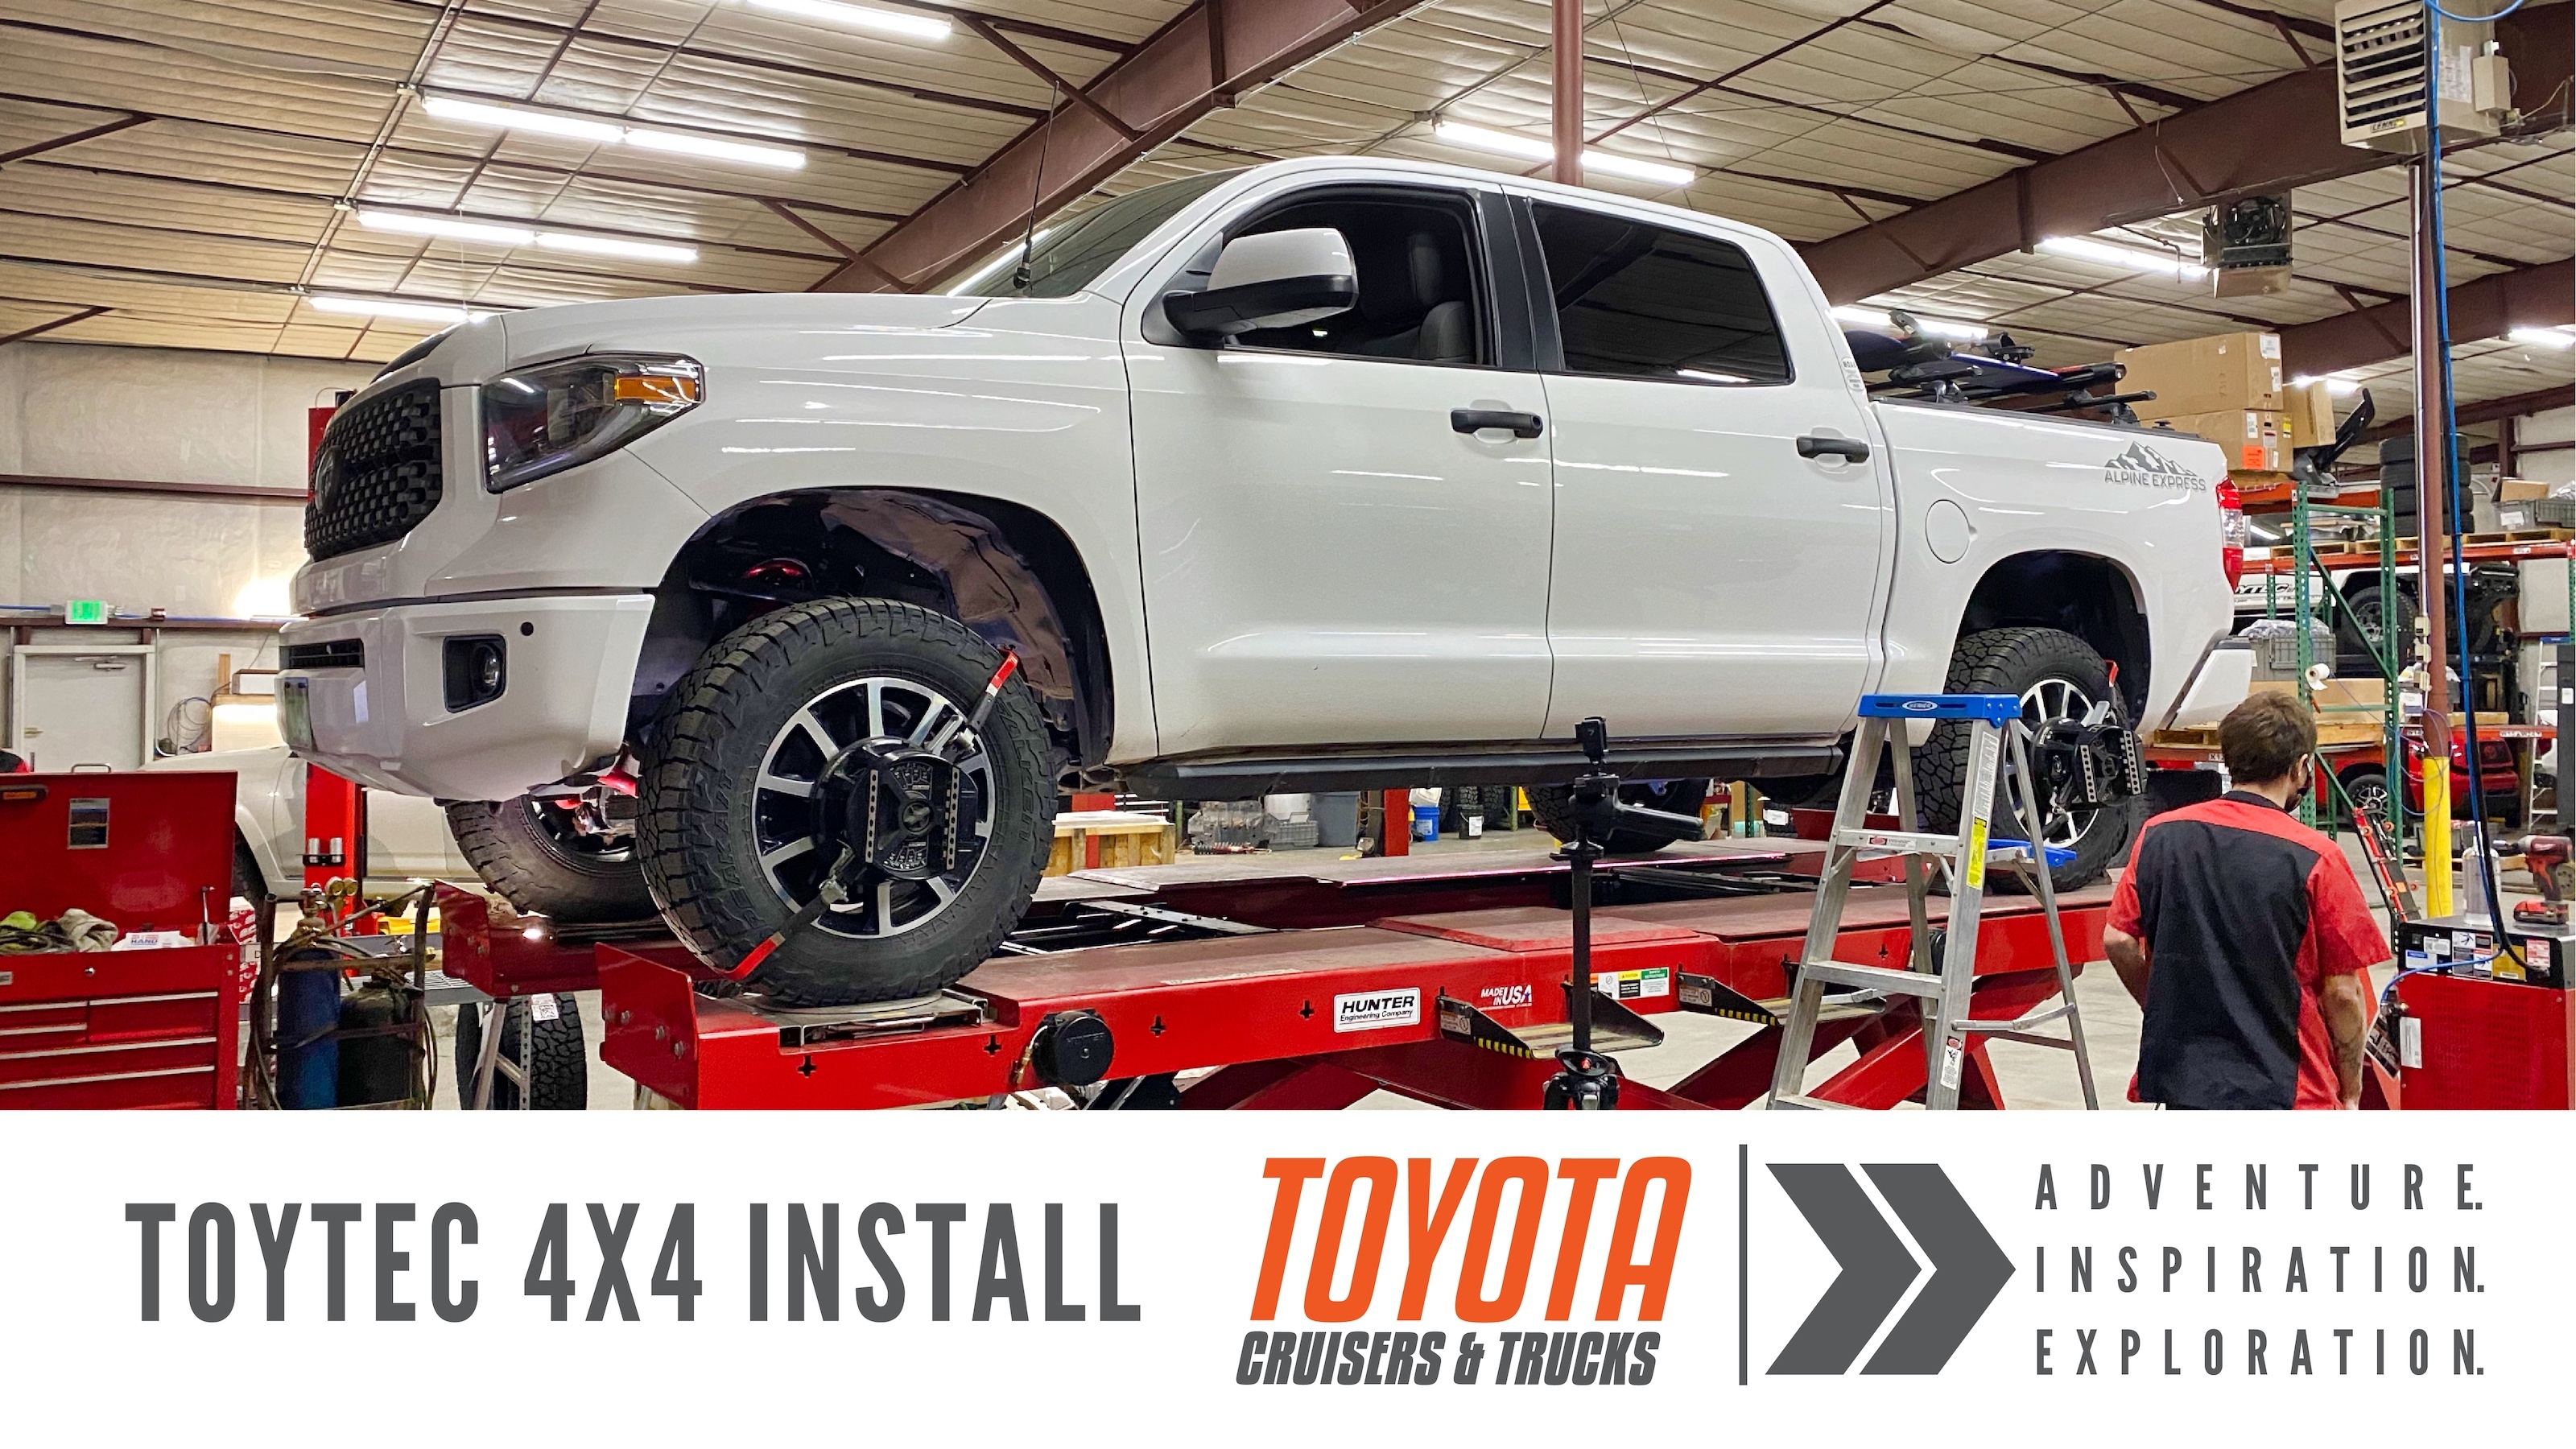 Install Day At Toytec 4x4 For The